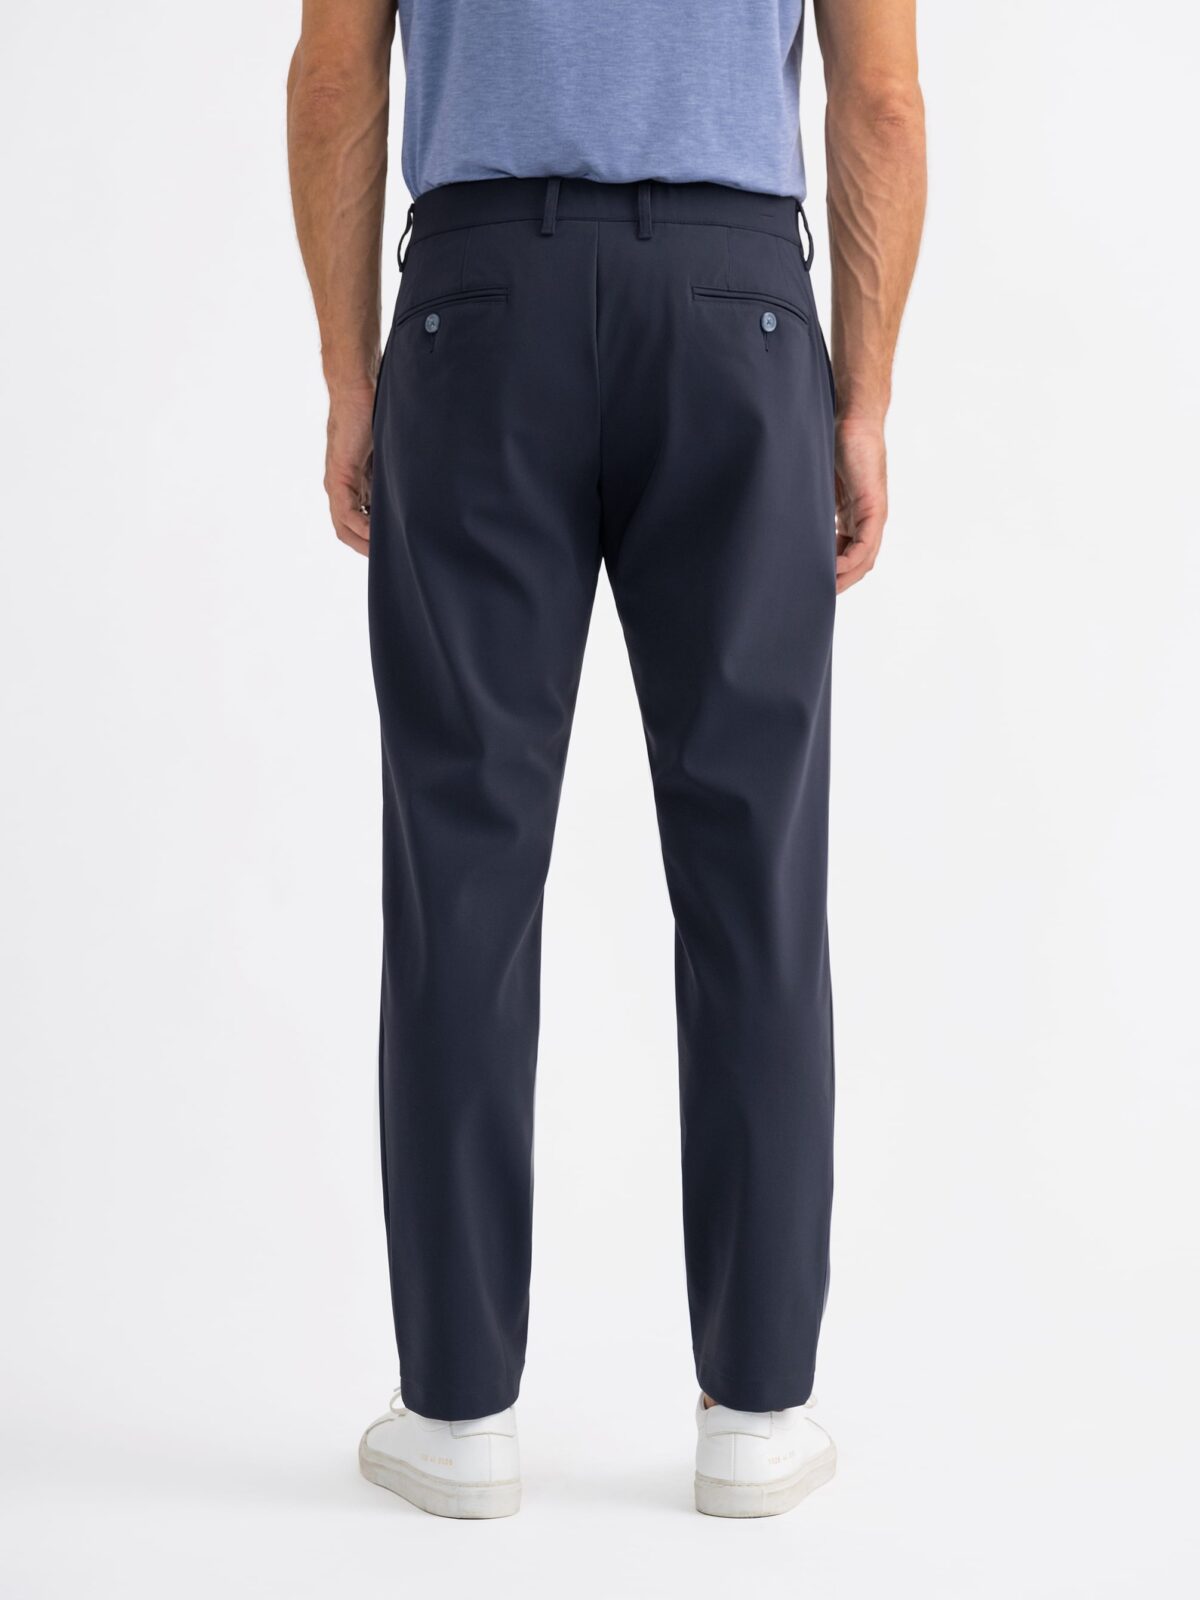 Men's Chino Pant Slim Fit Cotton Stretch | AM Supply